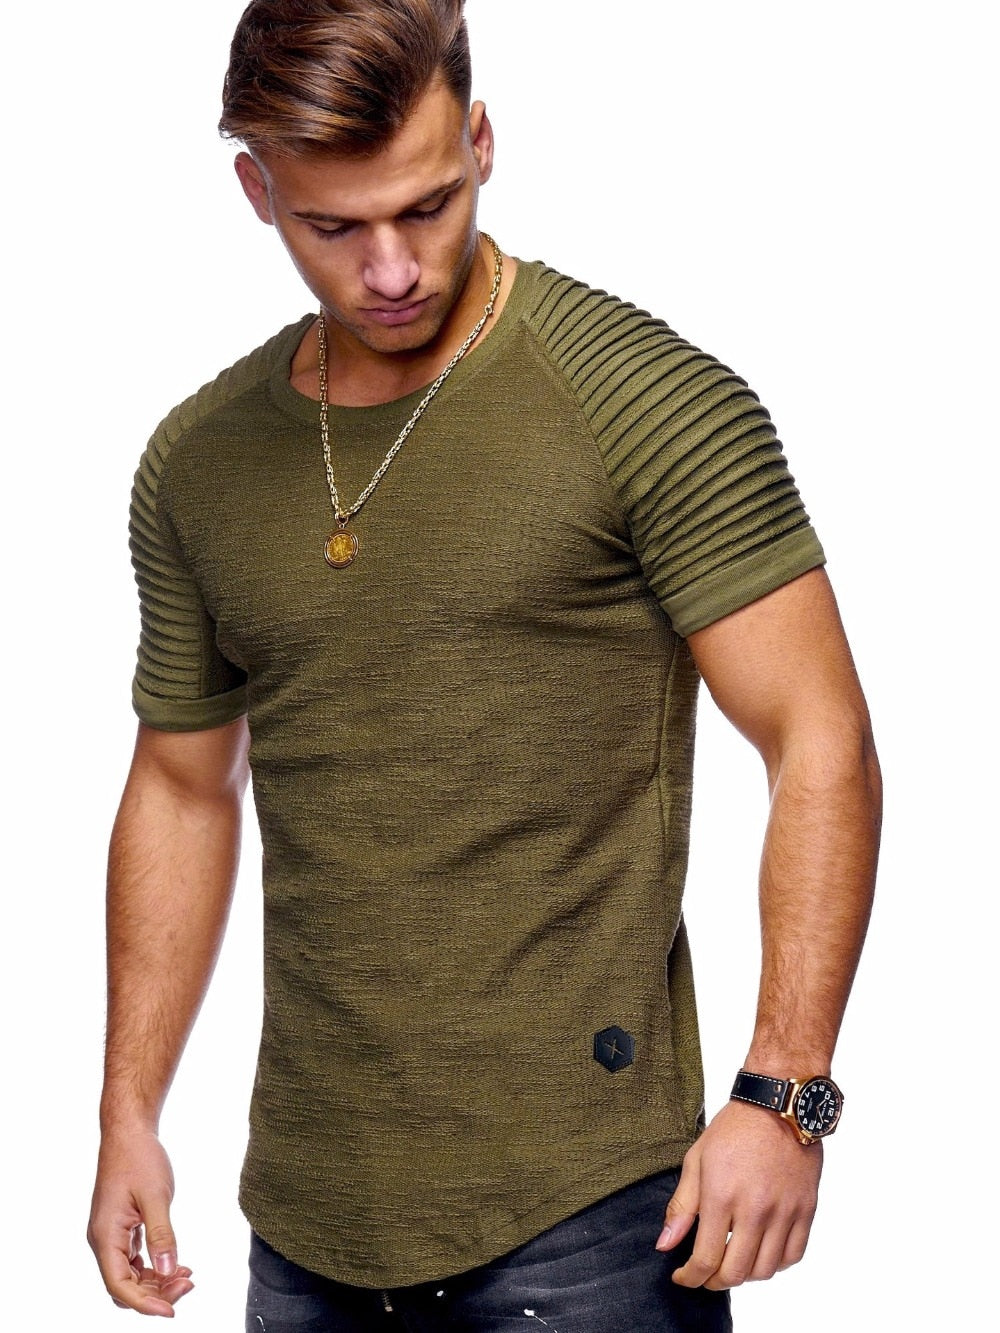 Pleated Patch Long Sleeve Men Spring Casual  T-Shirt Tops